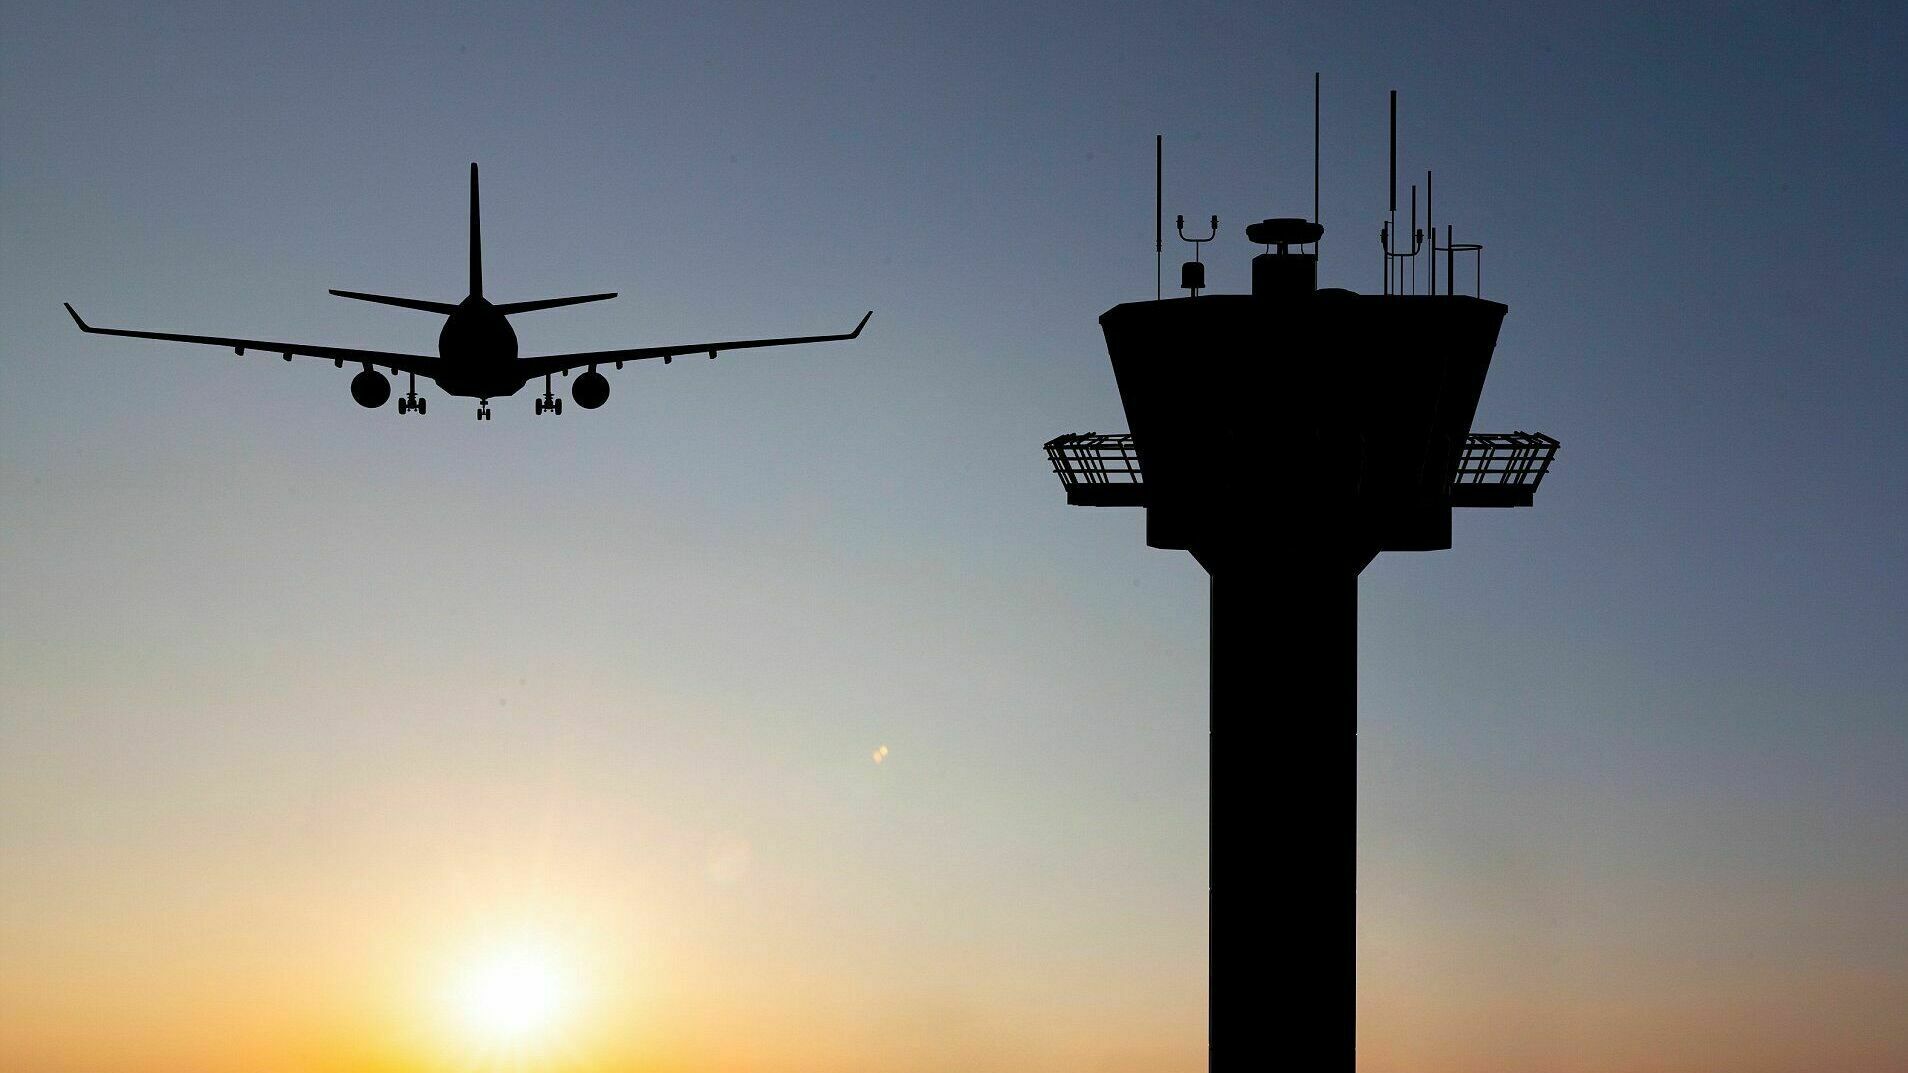 Aviation has gone down: fewer passengers, planes and pilots